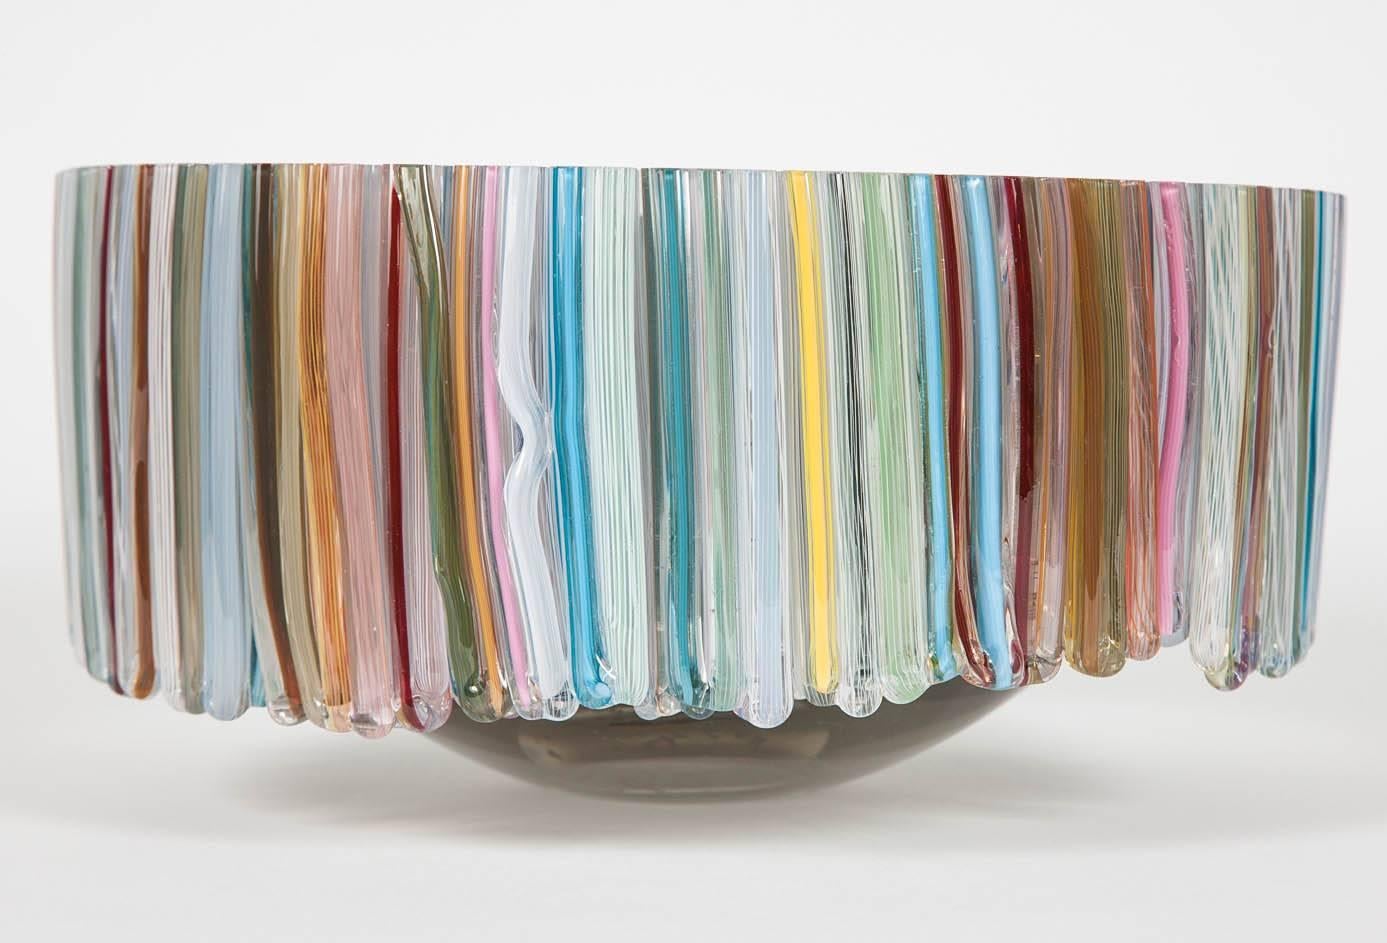 Hand-Crafted Thread Turmaline, a unique mixed colour glass centrepiece by Sabine Lintzen